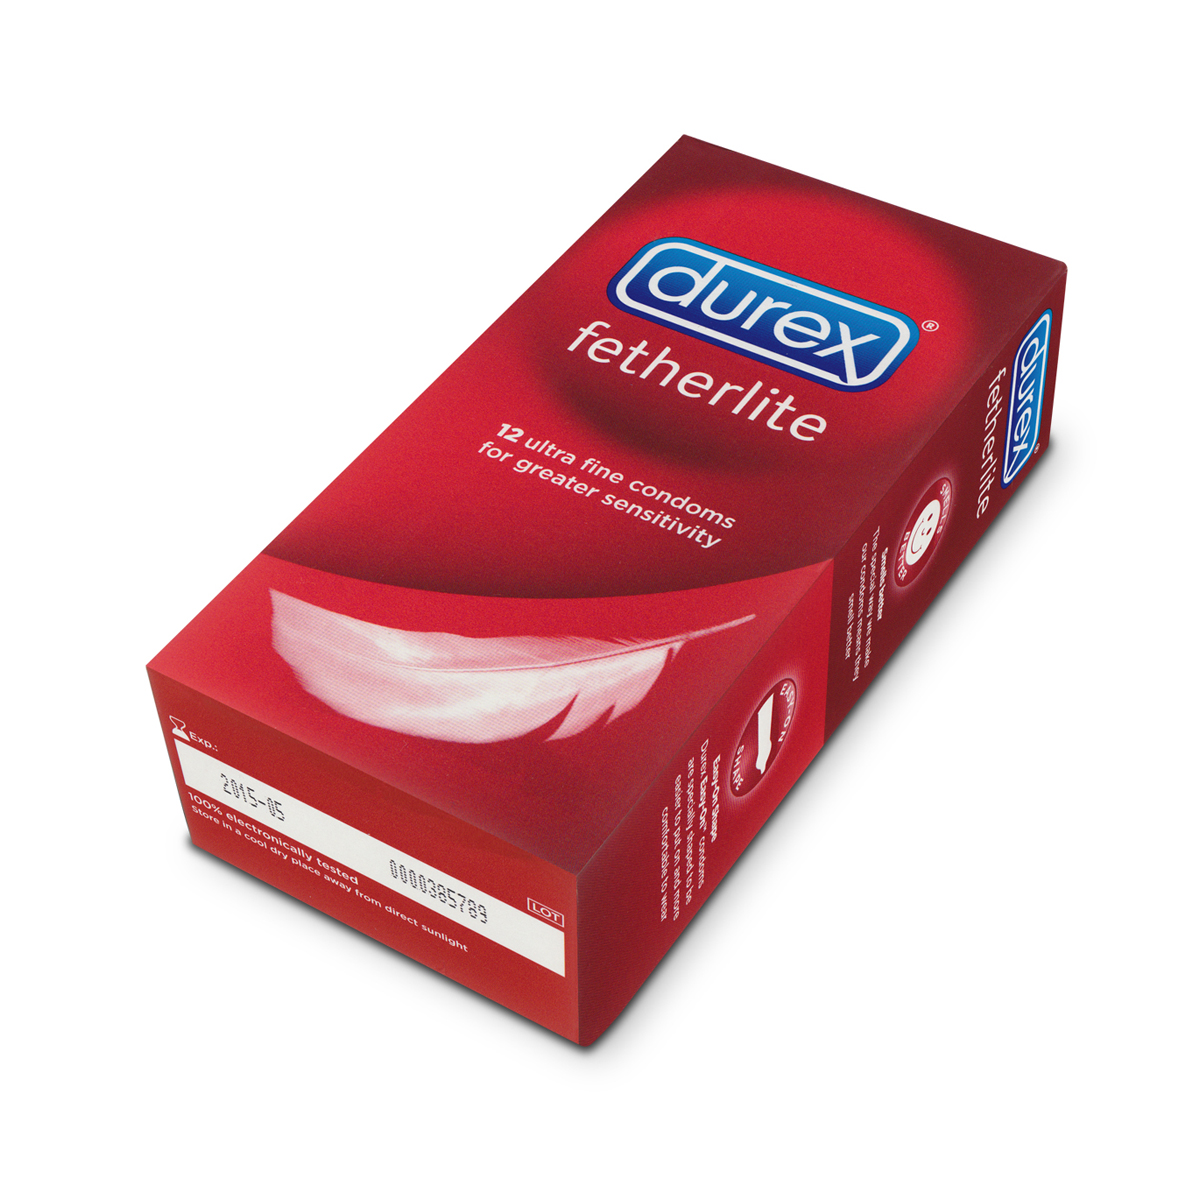 Durex fetherlite condoms (box of 12) – Sorry, we no longer stock this product